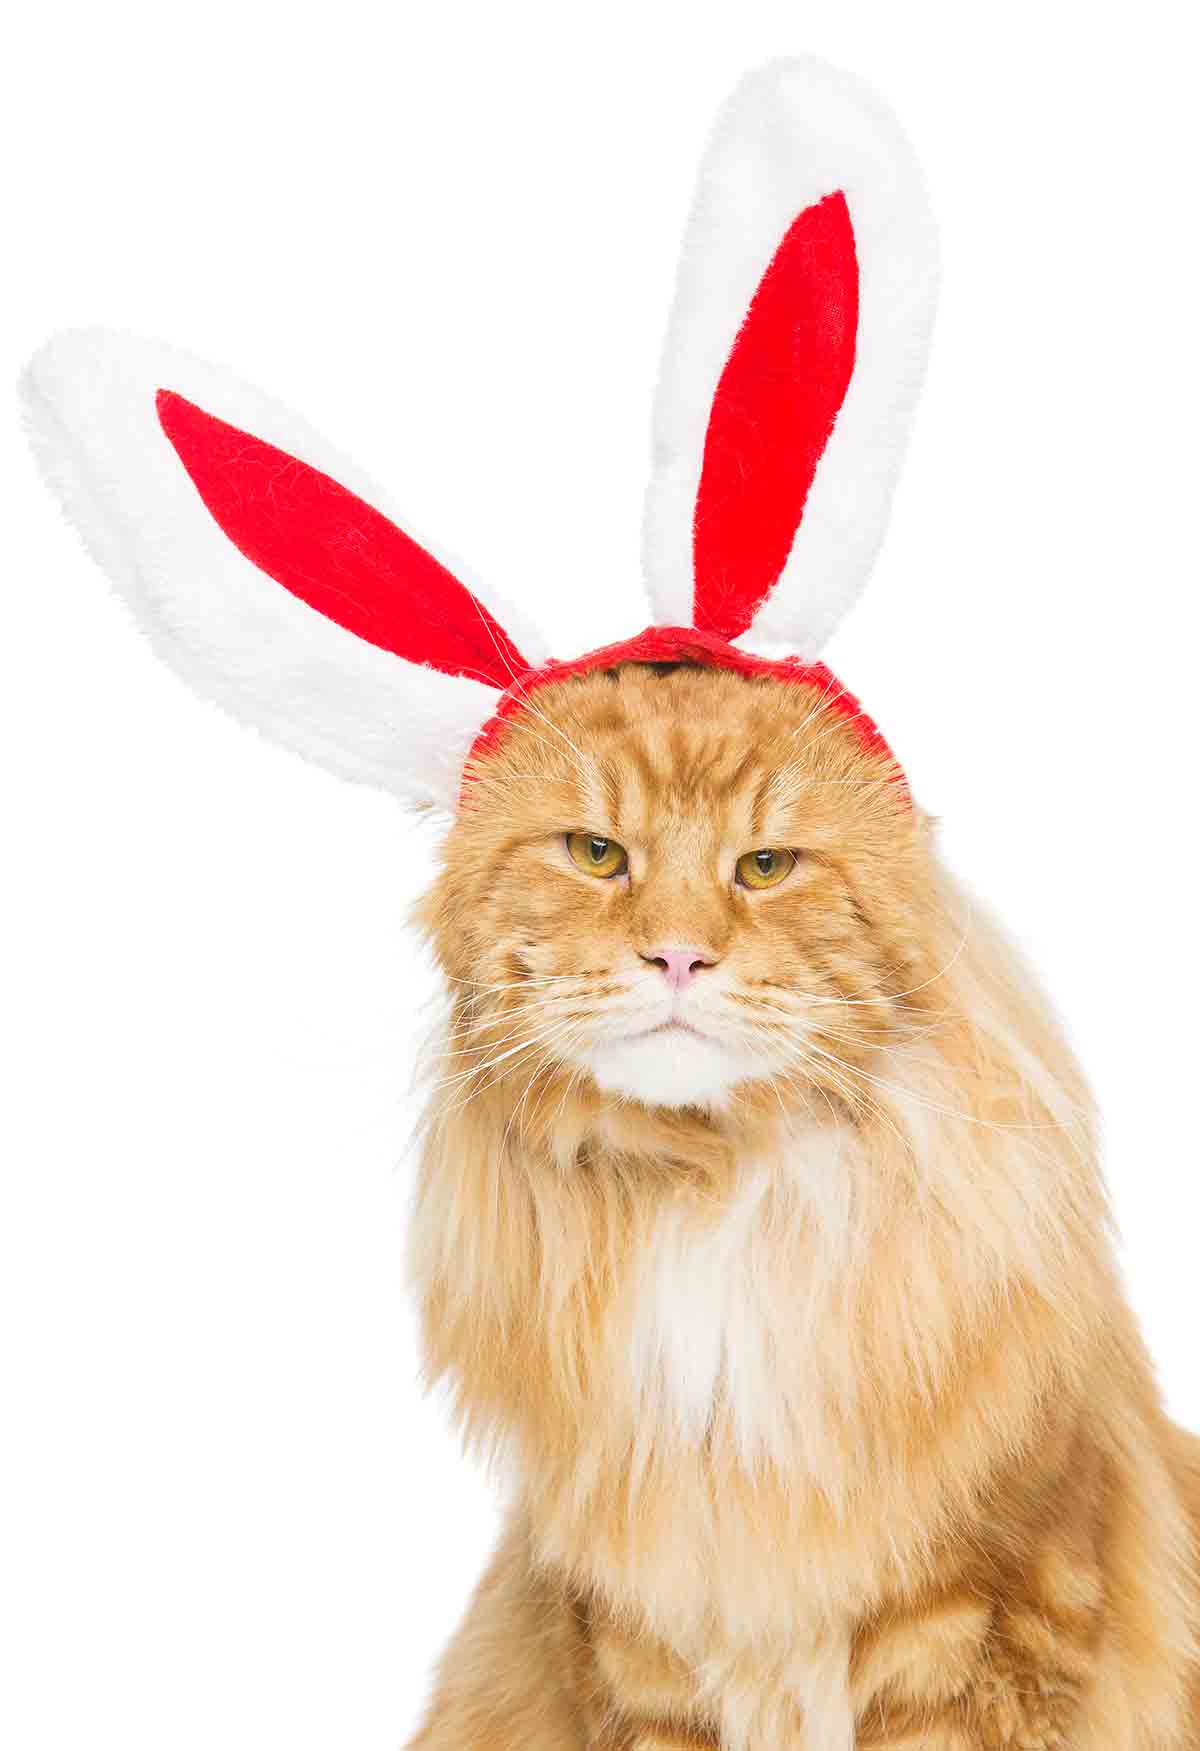 A bored looking cat wearing red buddy ears.